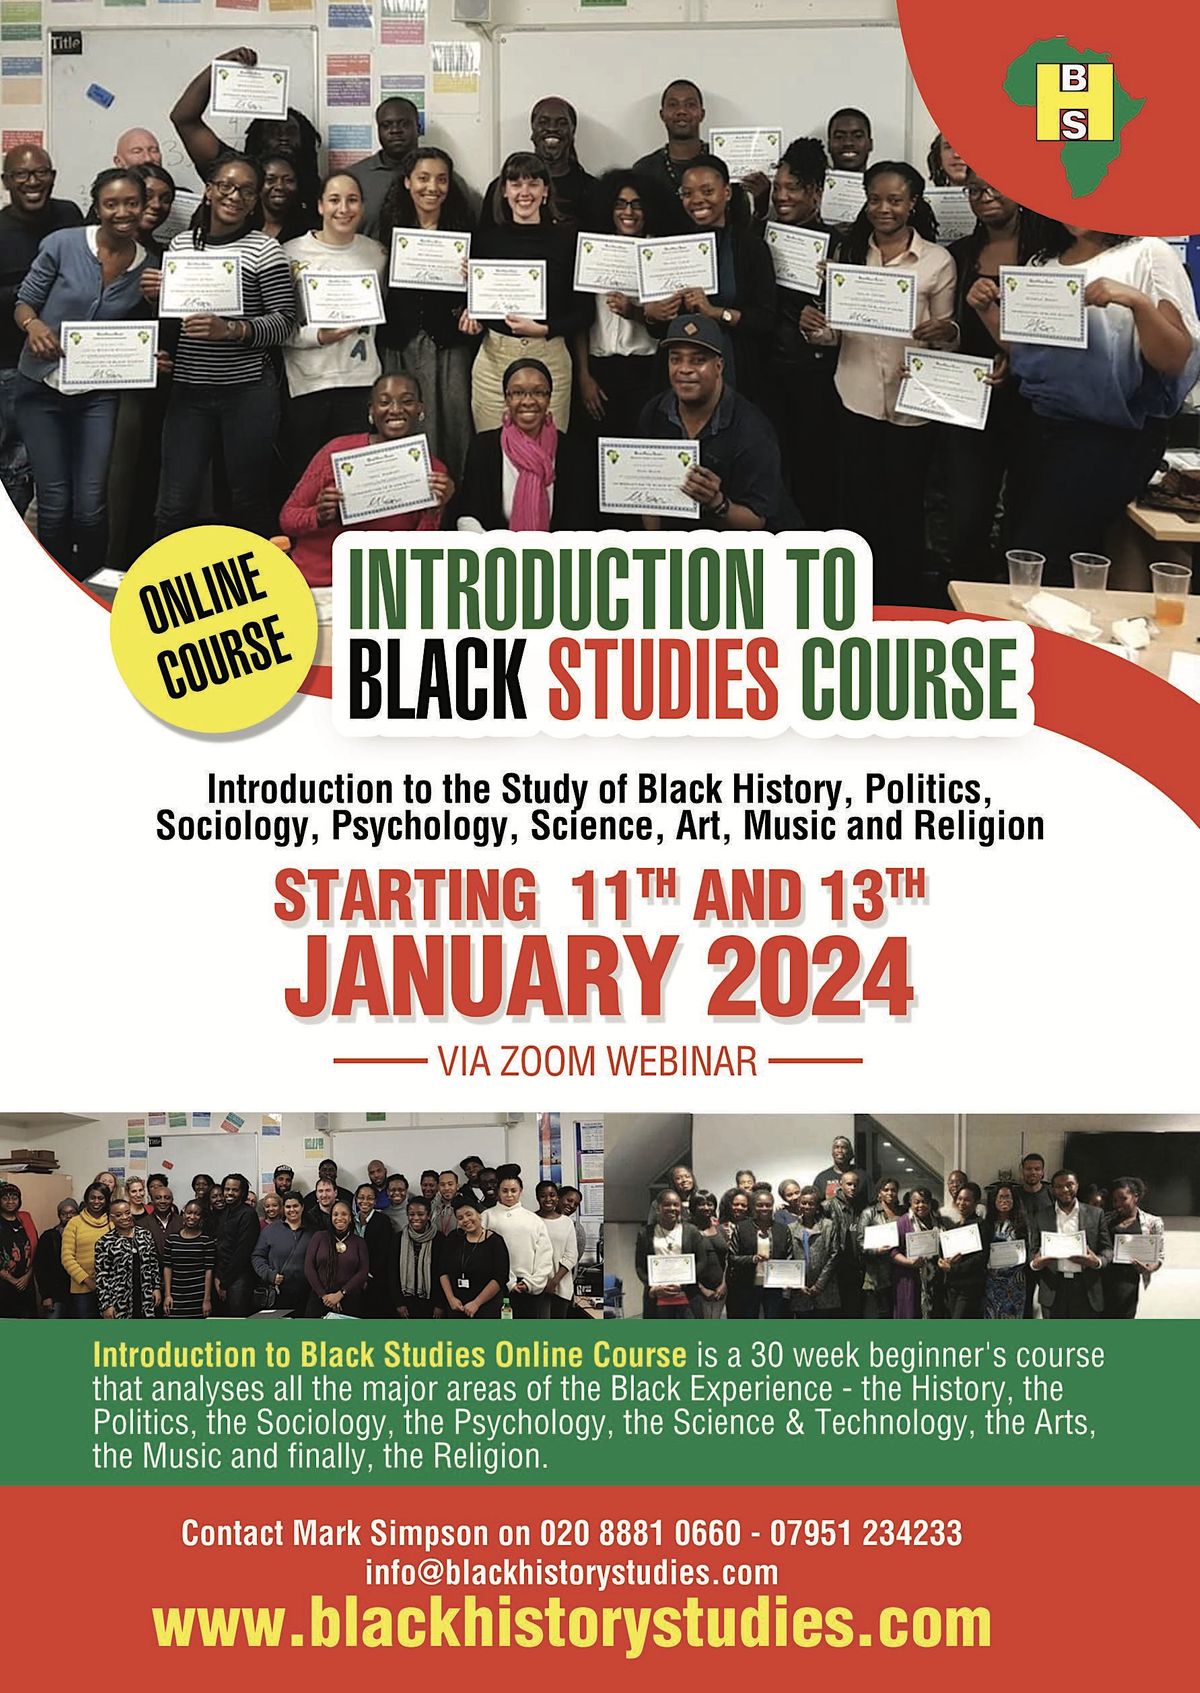 Online Introduction to Black Studies Course - January 2024